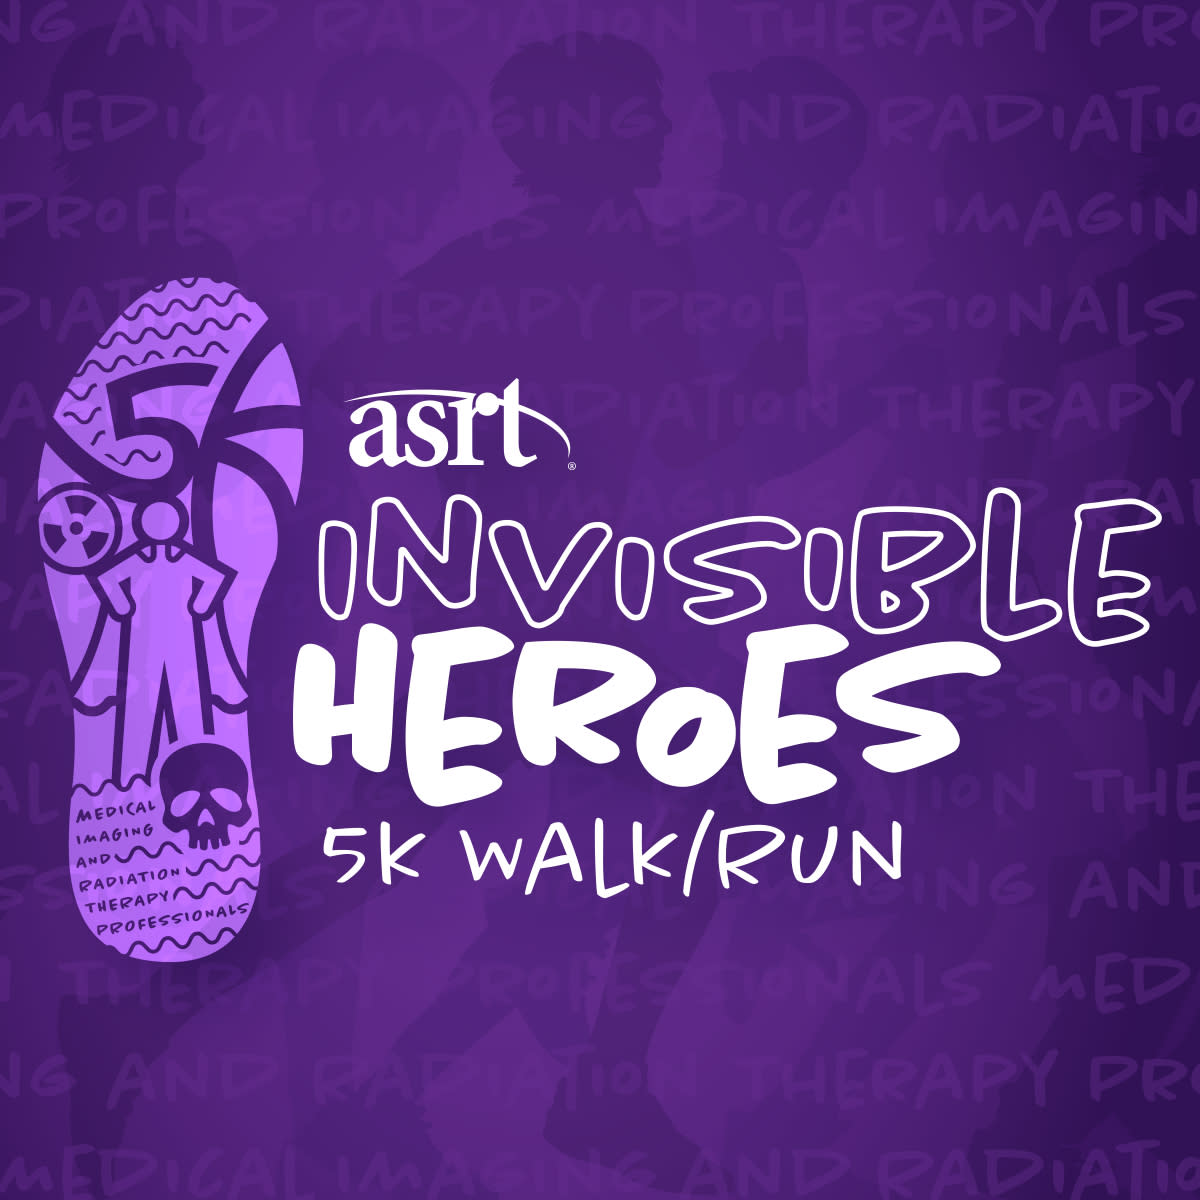 Join Us in Supporting the ASRT Invisible Heroes 5K Walk/Run